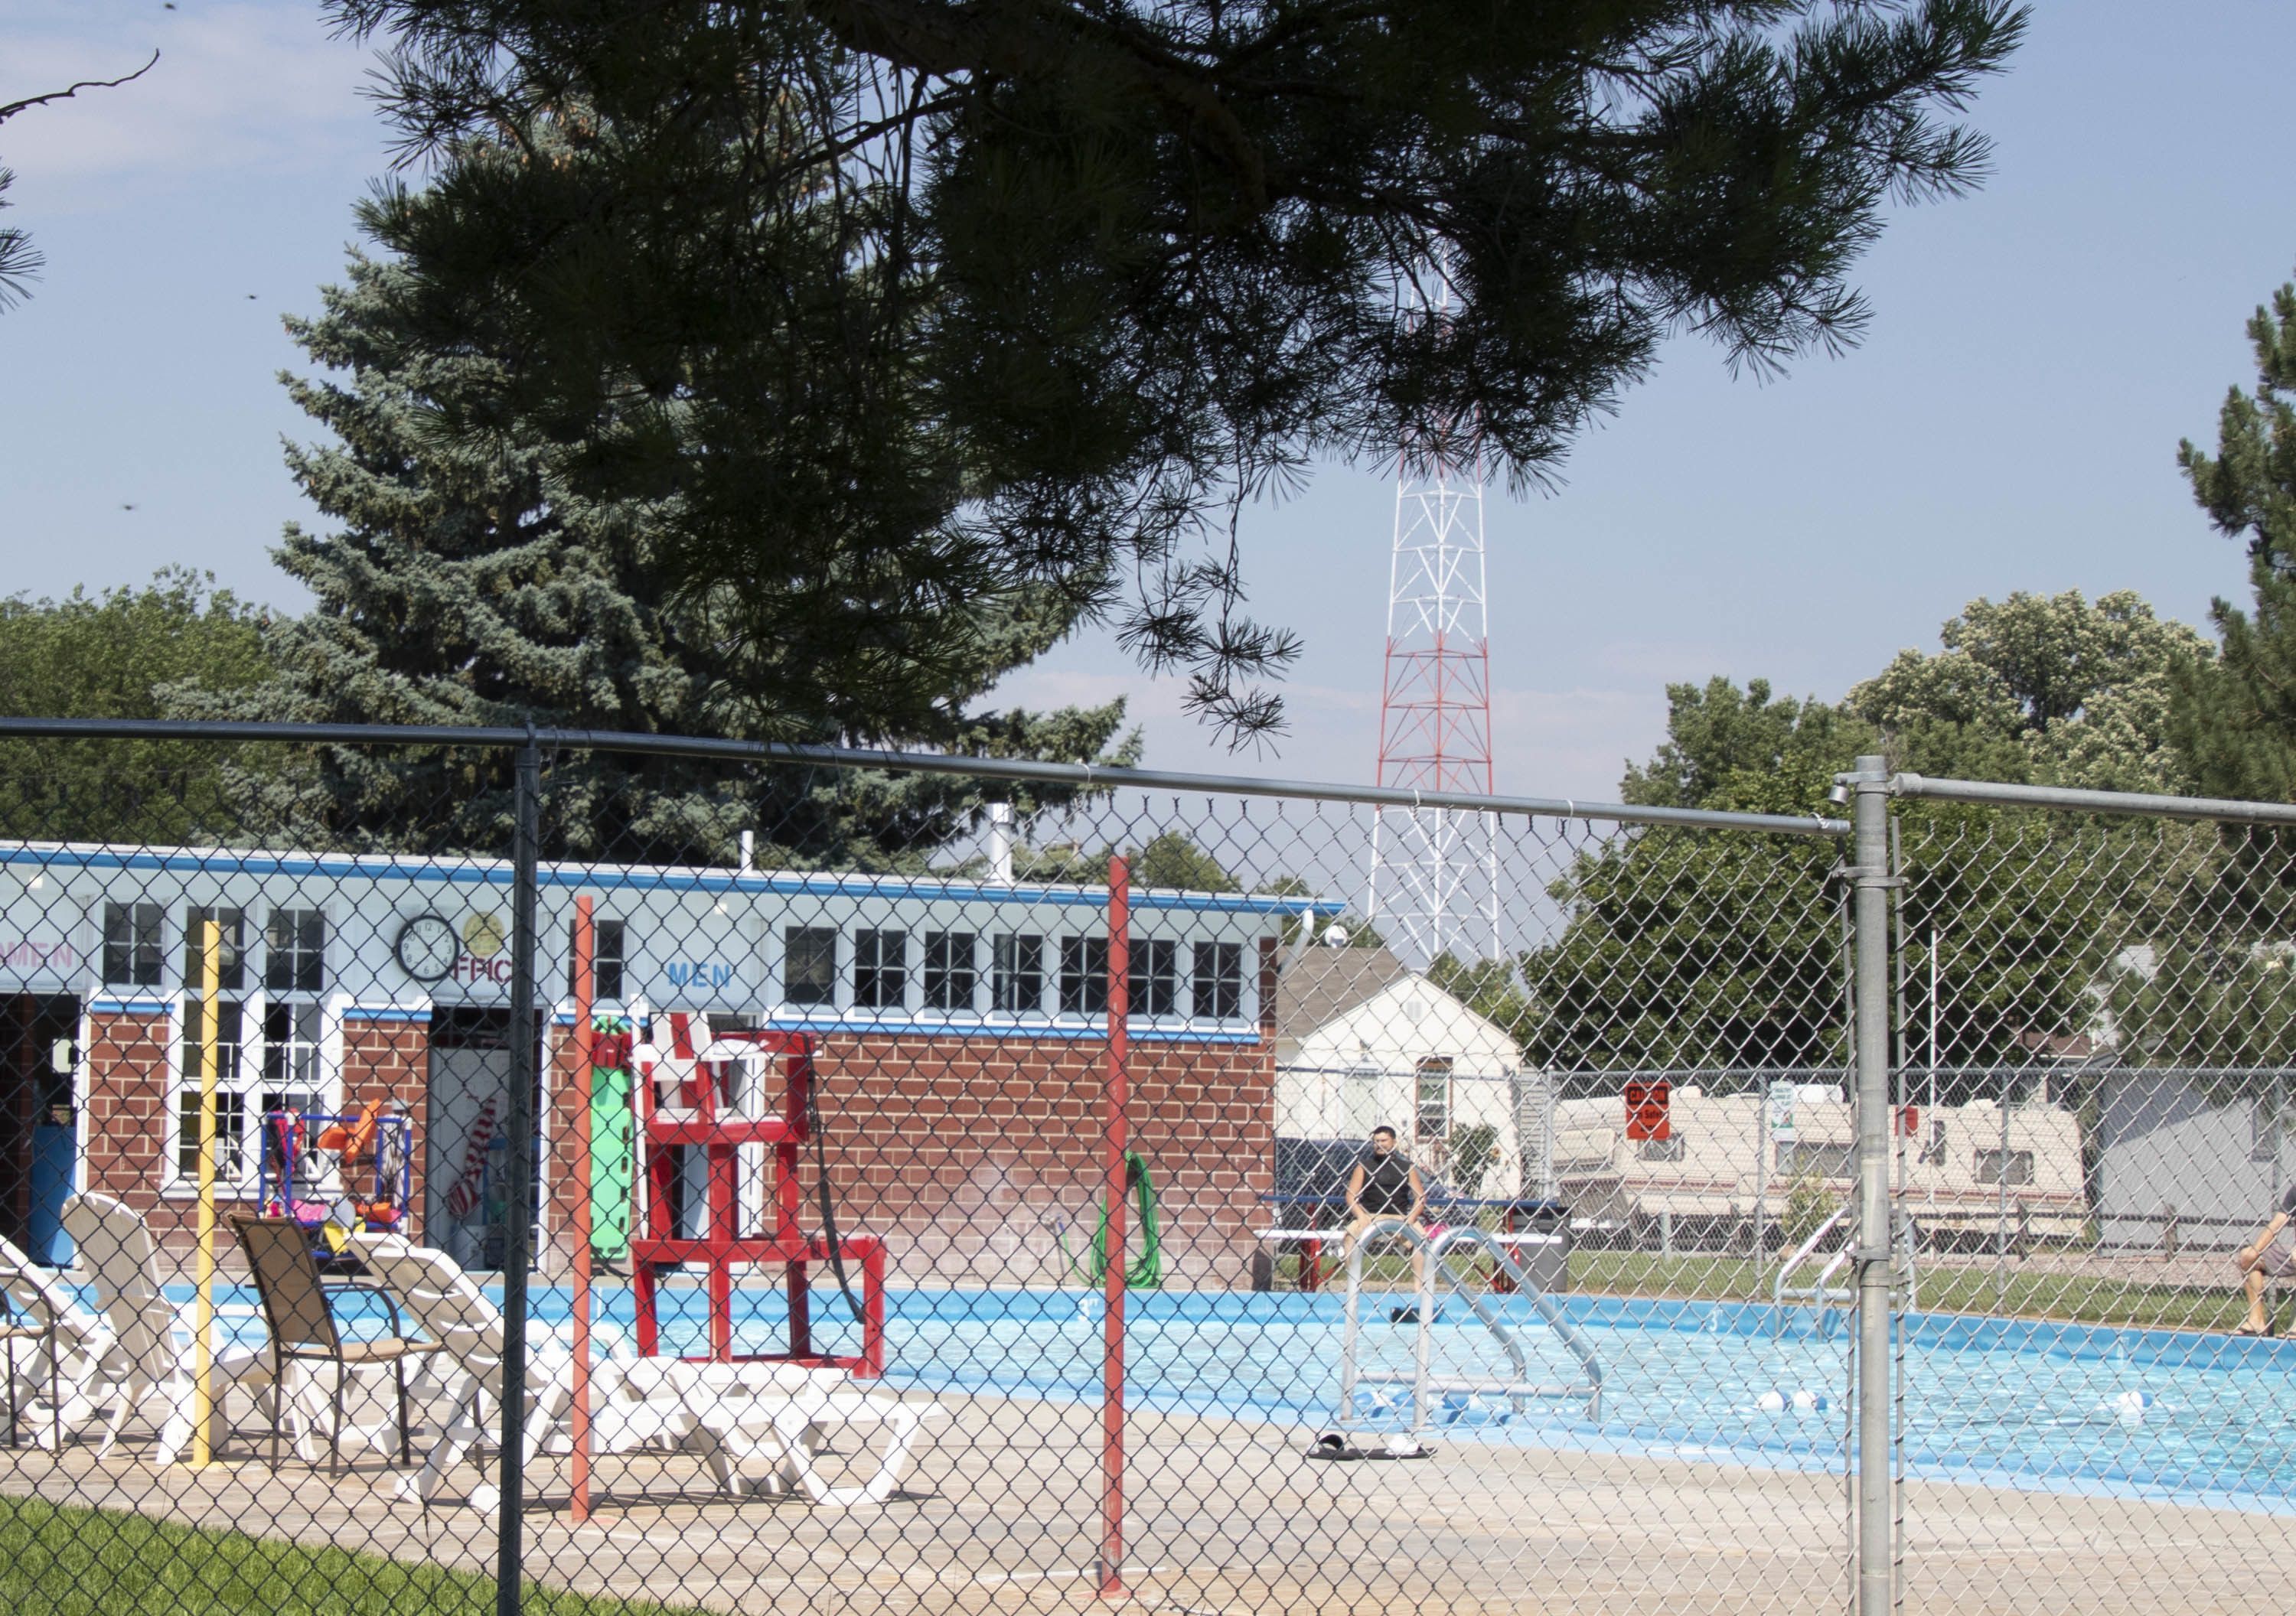 FAQs about lifeguards offering private lessons at your public facility